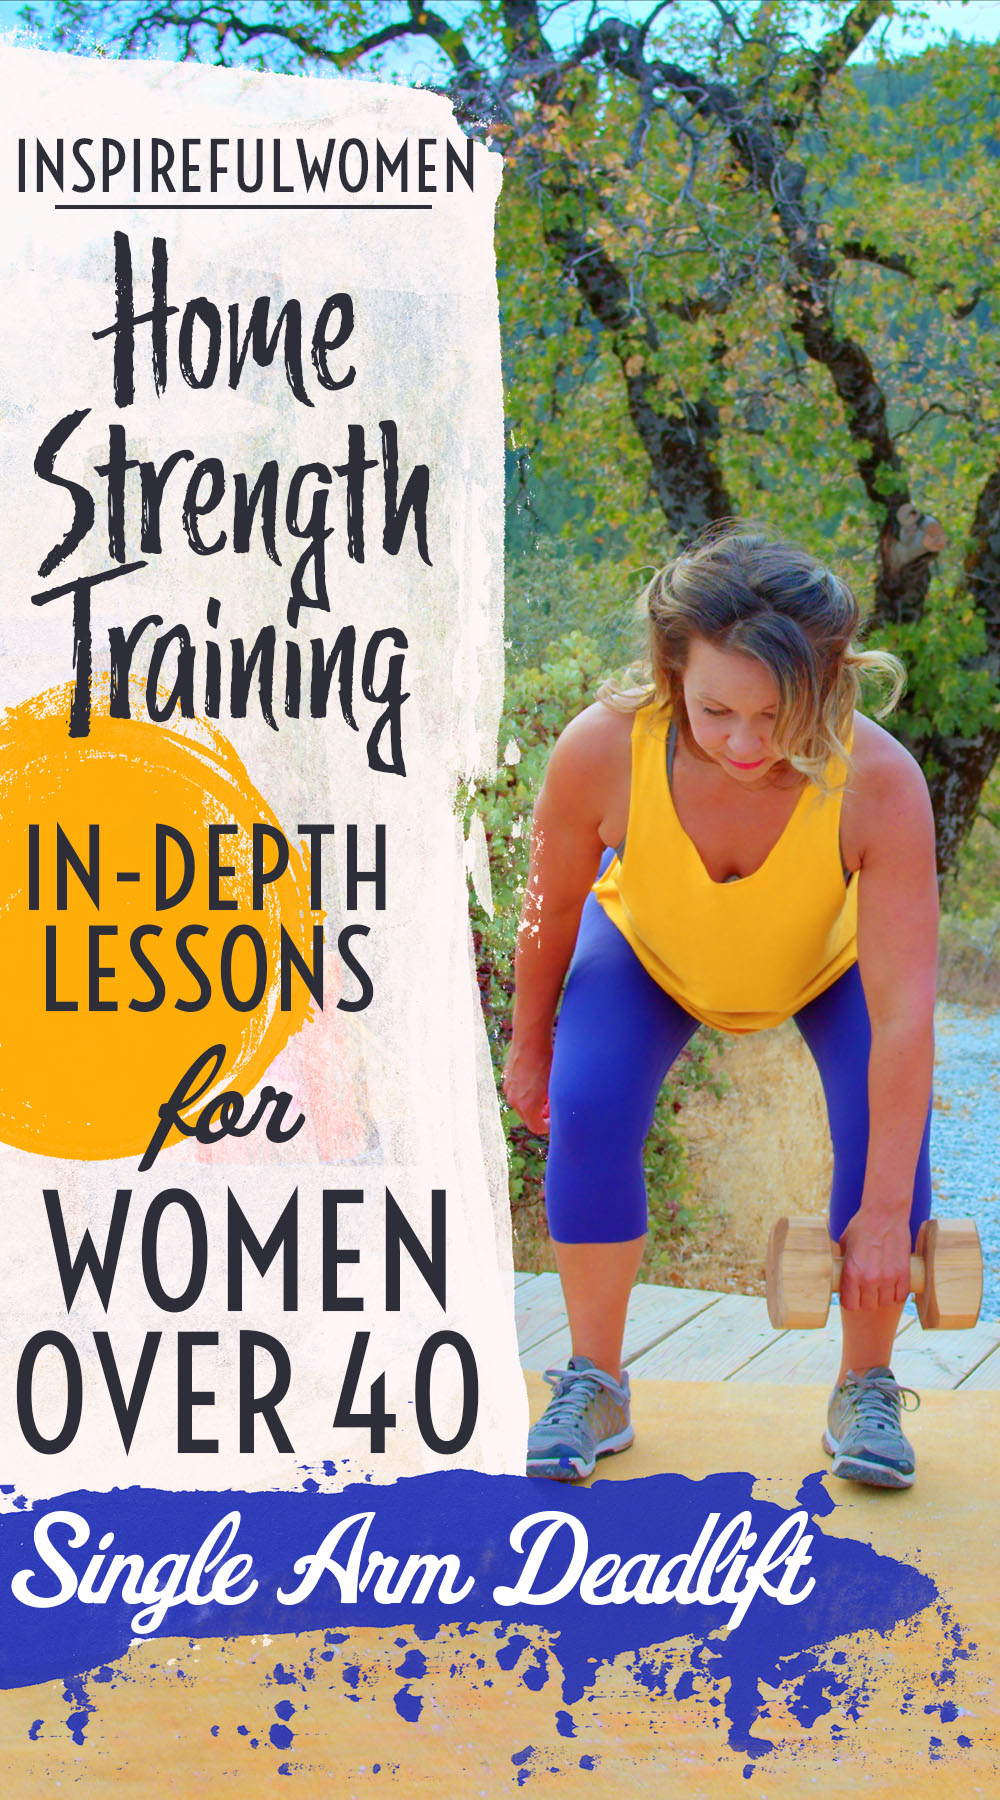 single-arm-deadlift-dumbbell-strengthening-posterior-chain-muscles-at-home-workout-women-40+